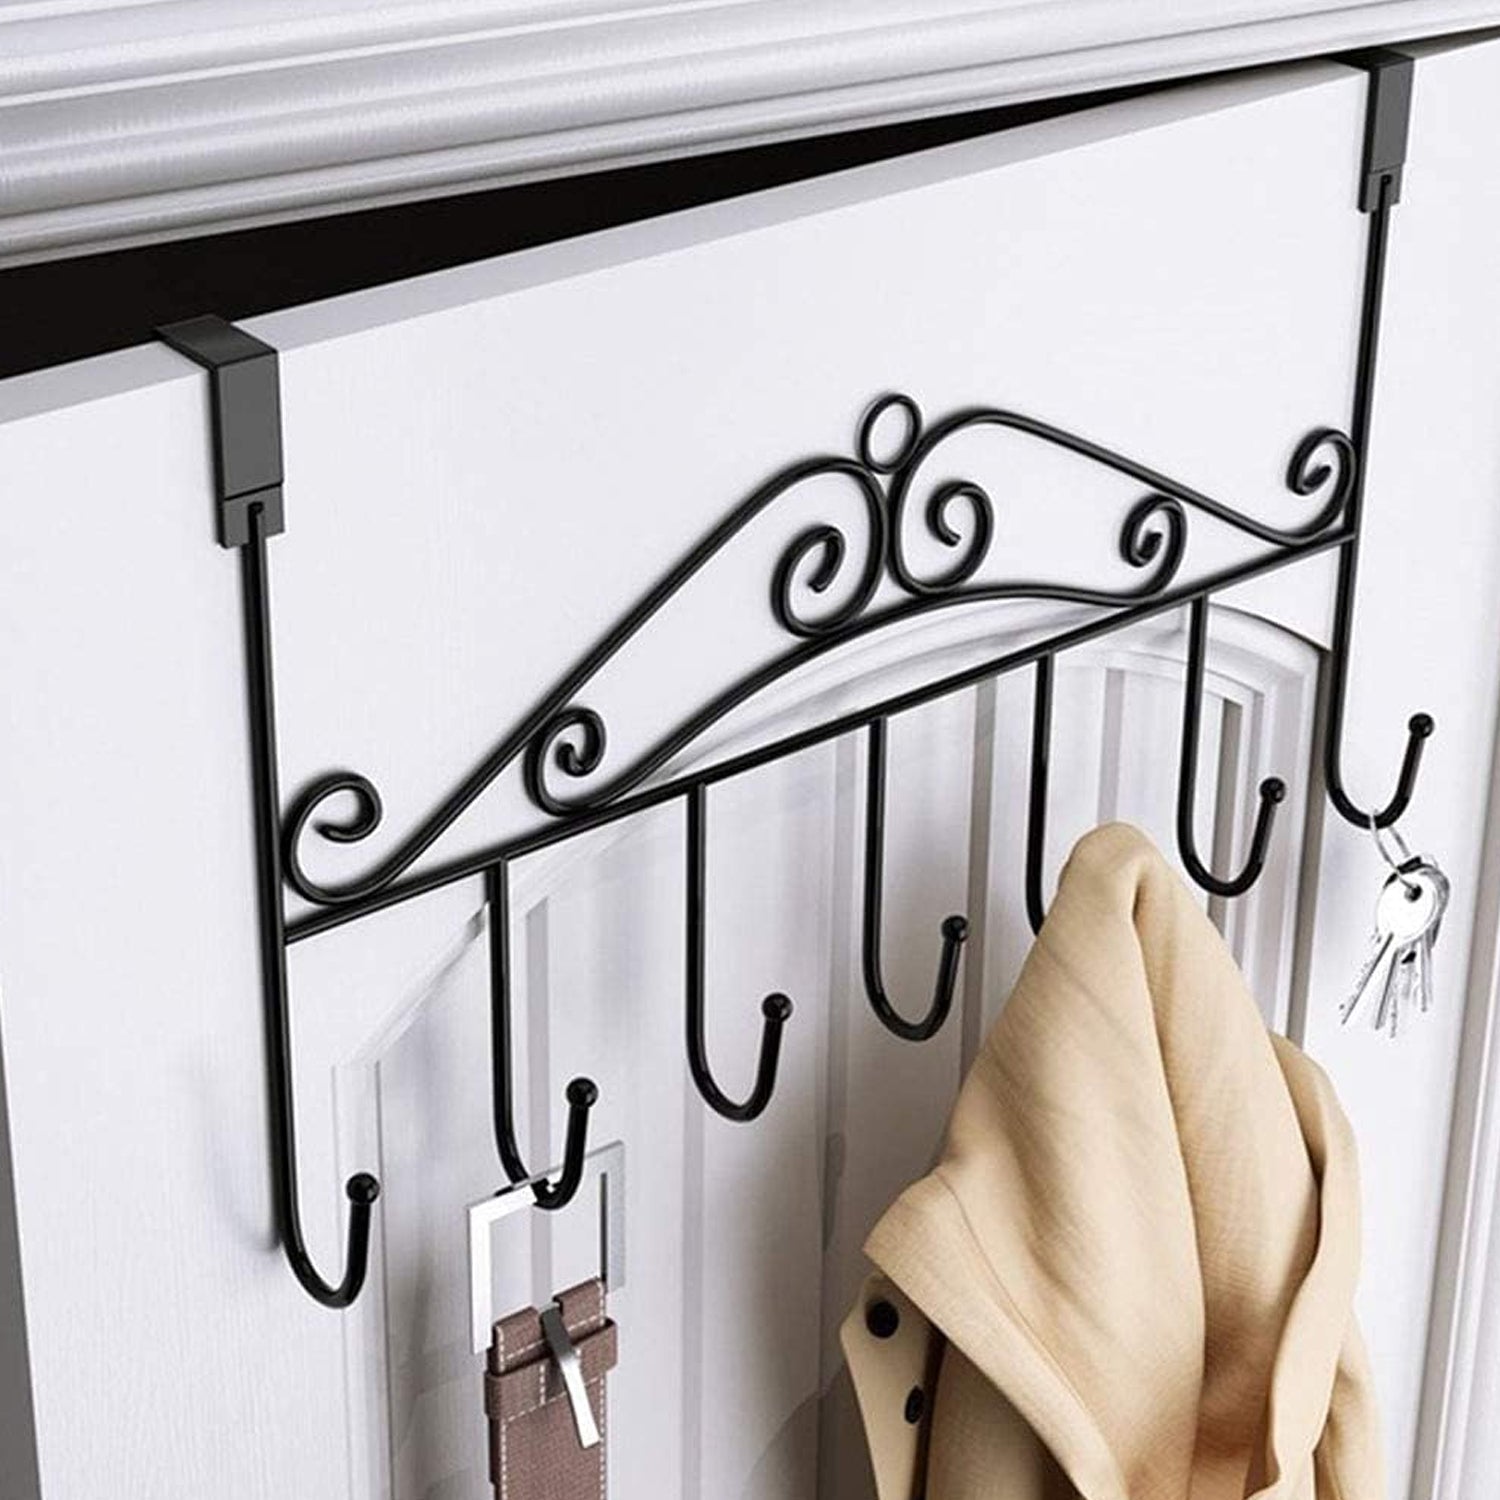 9383 Over The Door Hanger Rack 7 Hooks Decorative Ognazier Hook Rack Stylish Door Hanger Door Hook Hangers with 7 Hooks,Metal Hanging Rack for Home Office Use